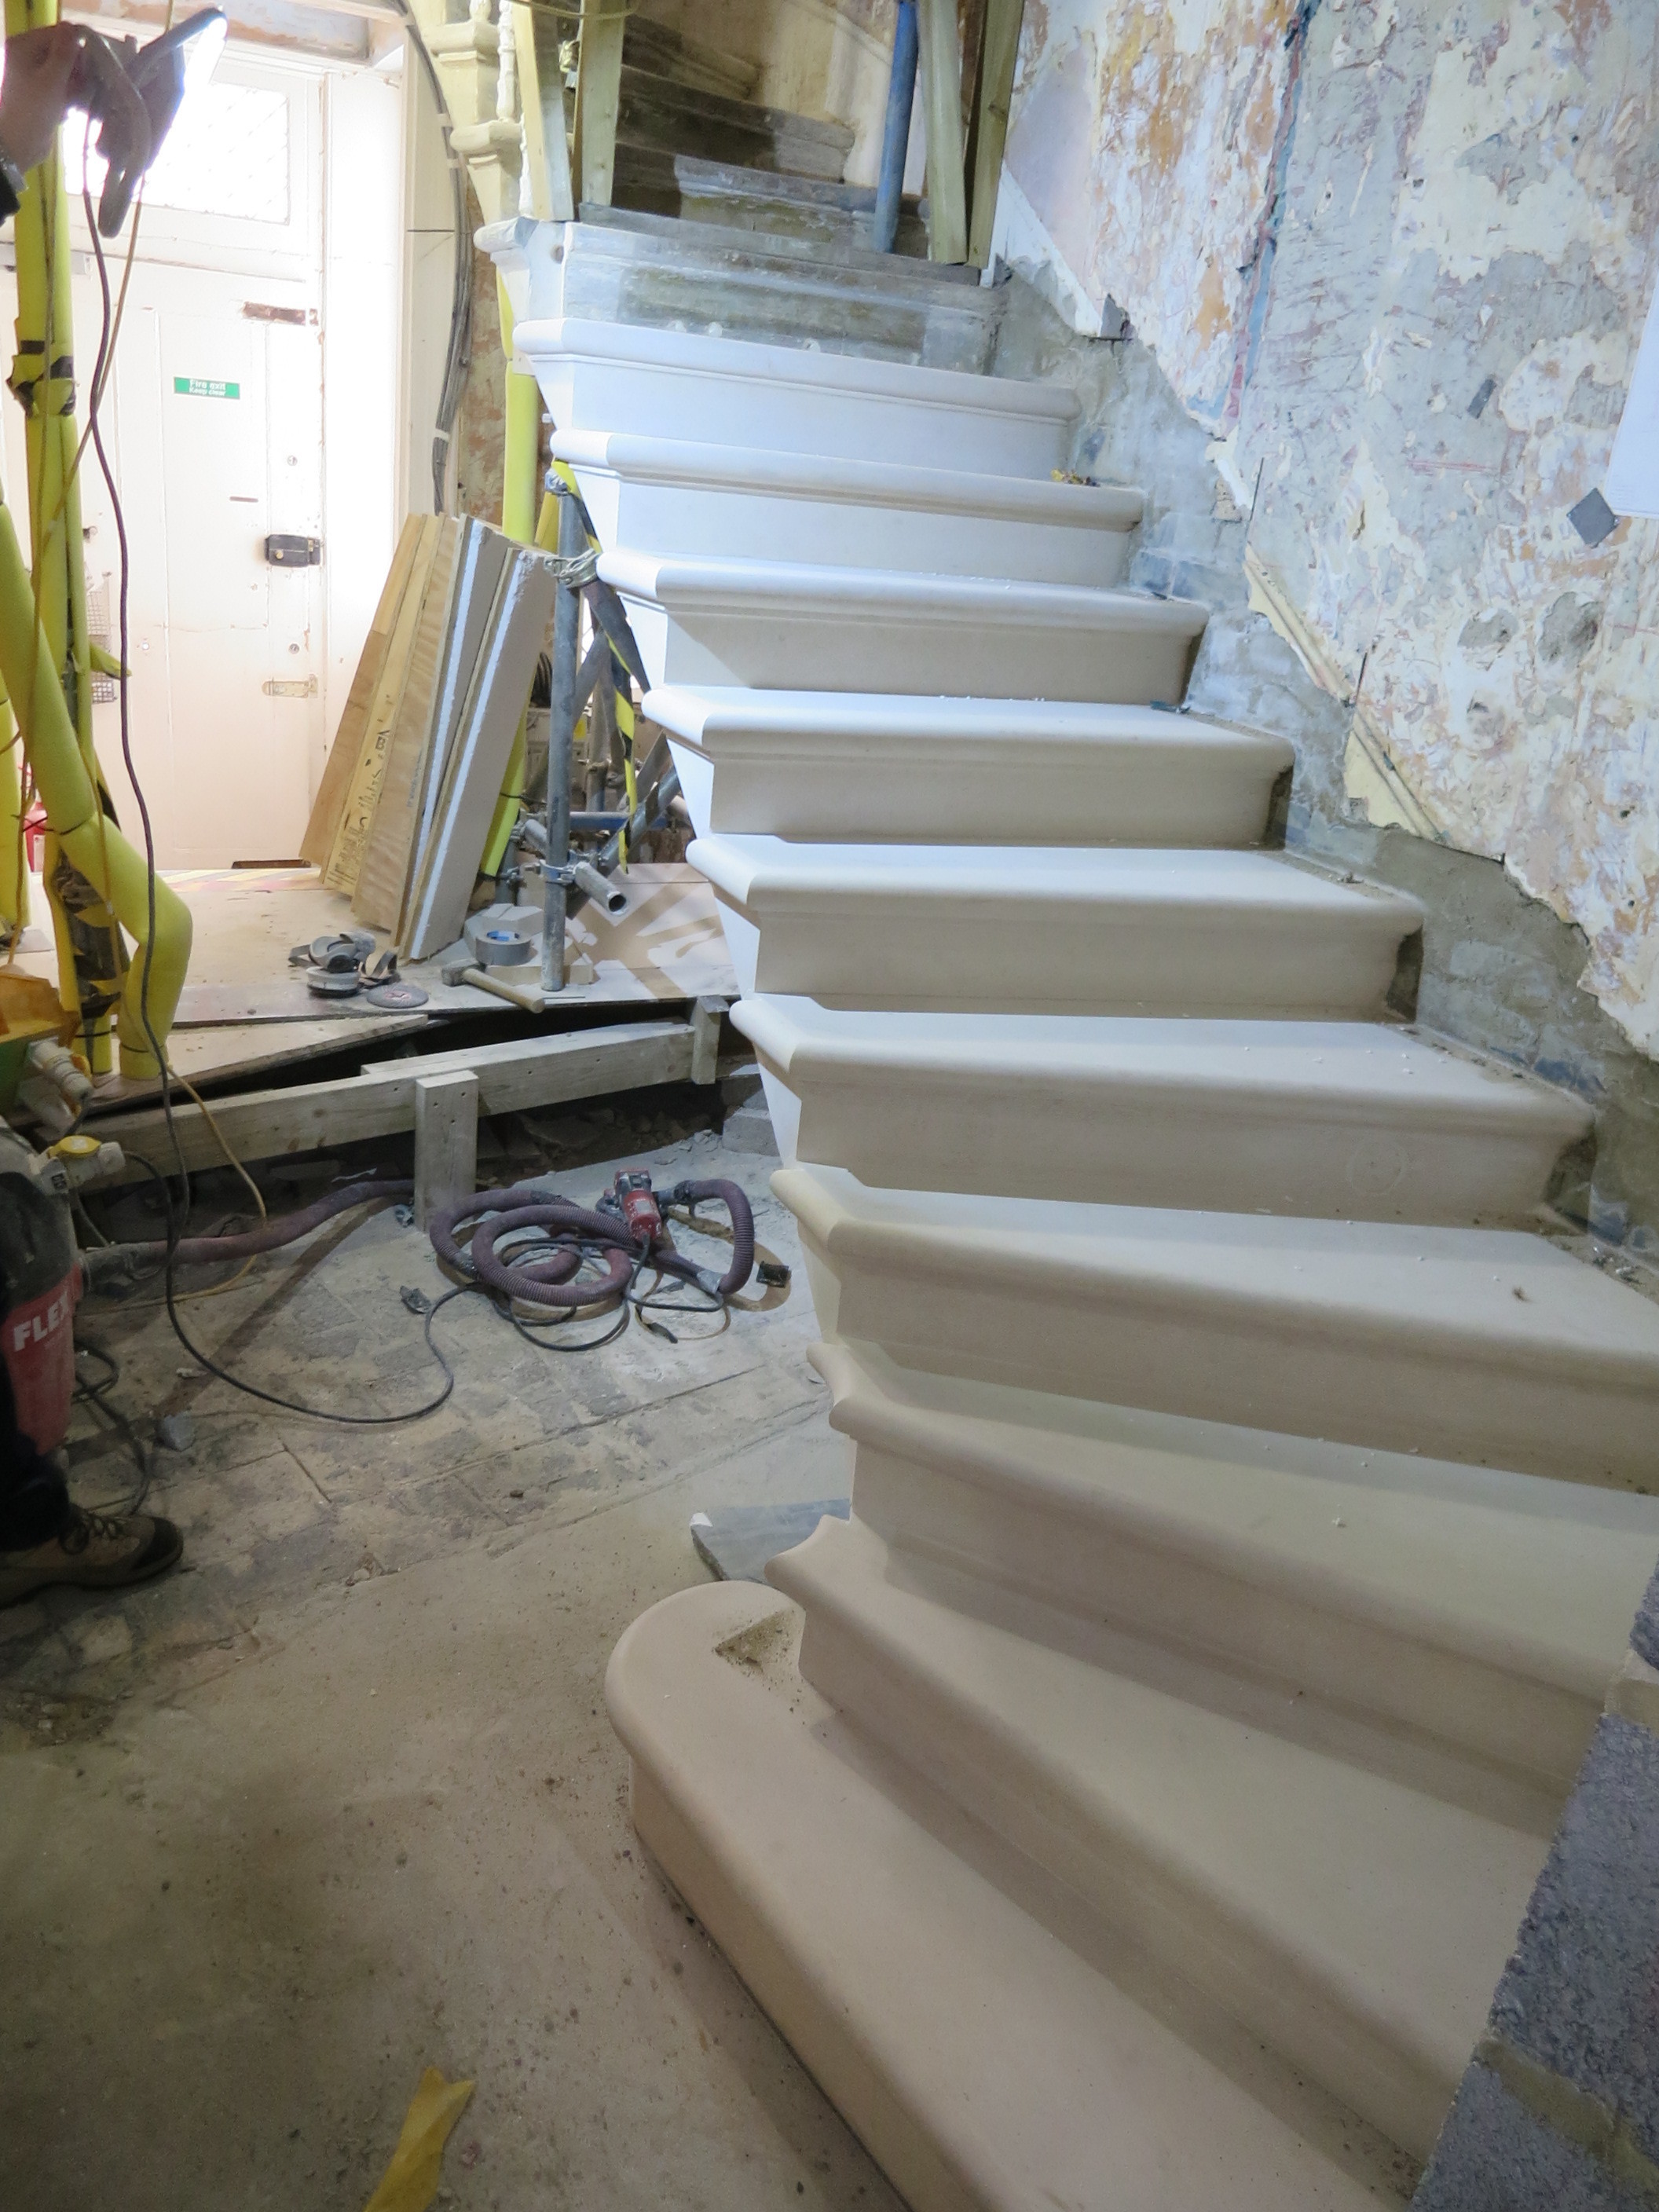 Brompton reinstated stair